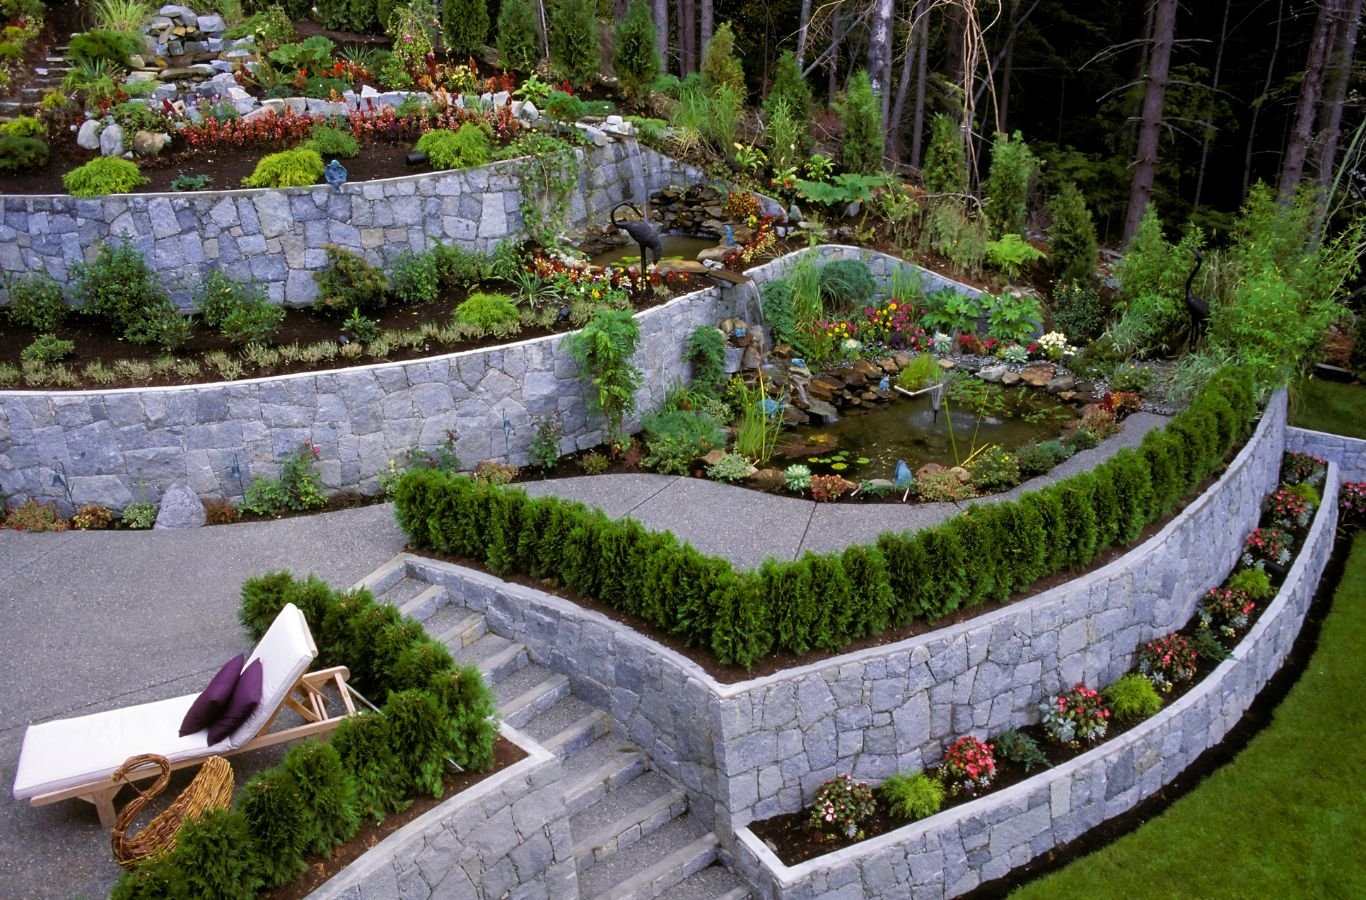 Discover the advantages of retaining walls in Vestavia Hills by FARE Outdoor Construction. Improve erosion control and add visual appeal to your property.